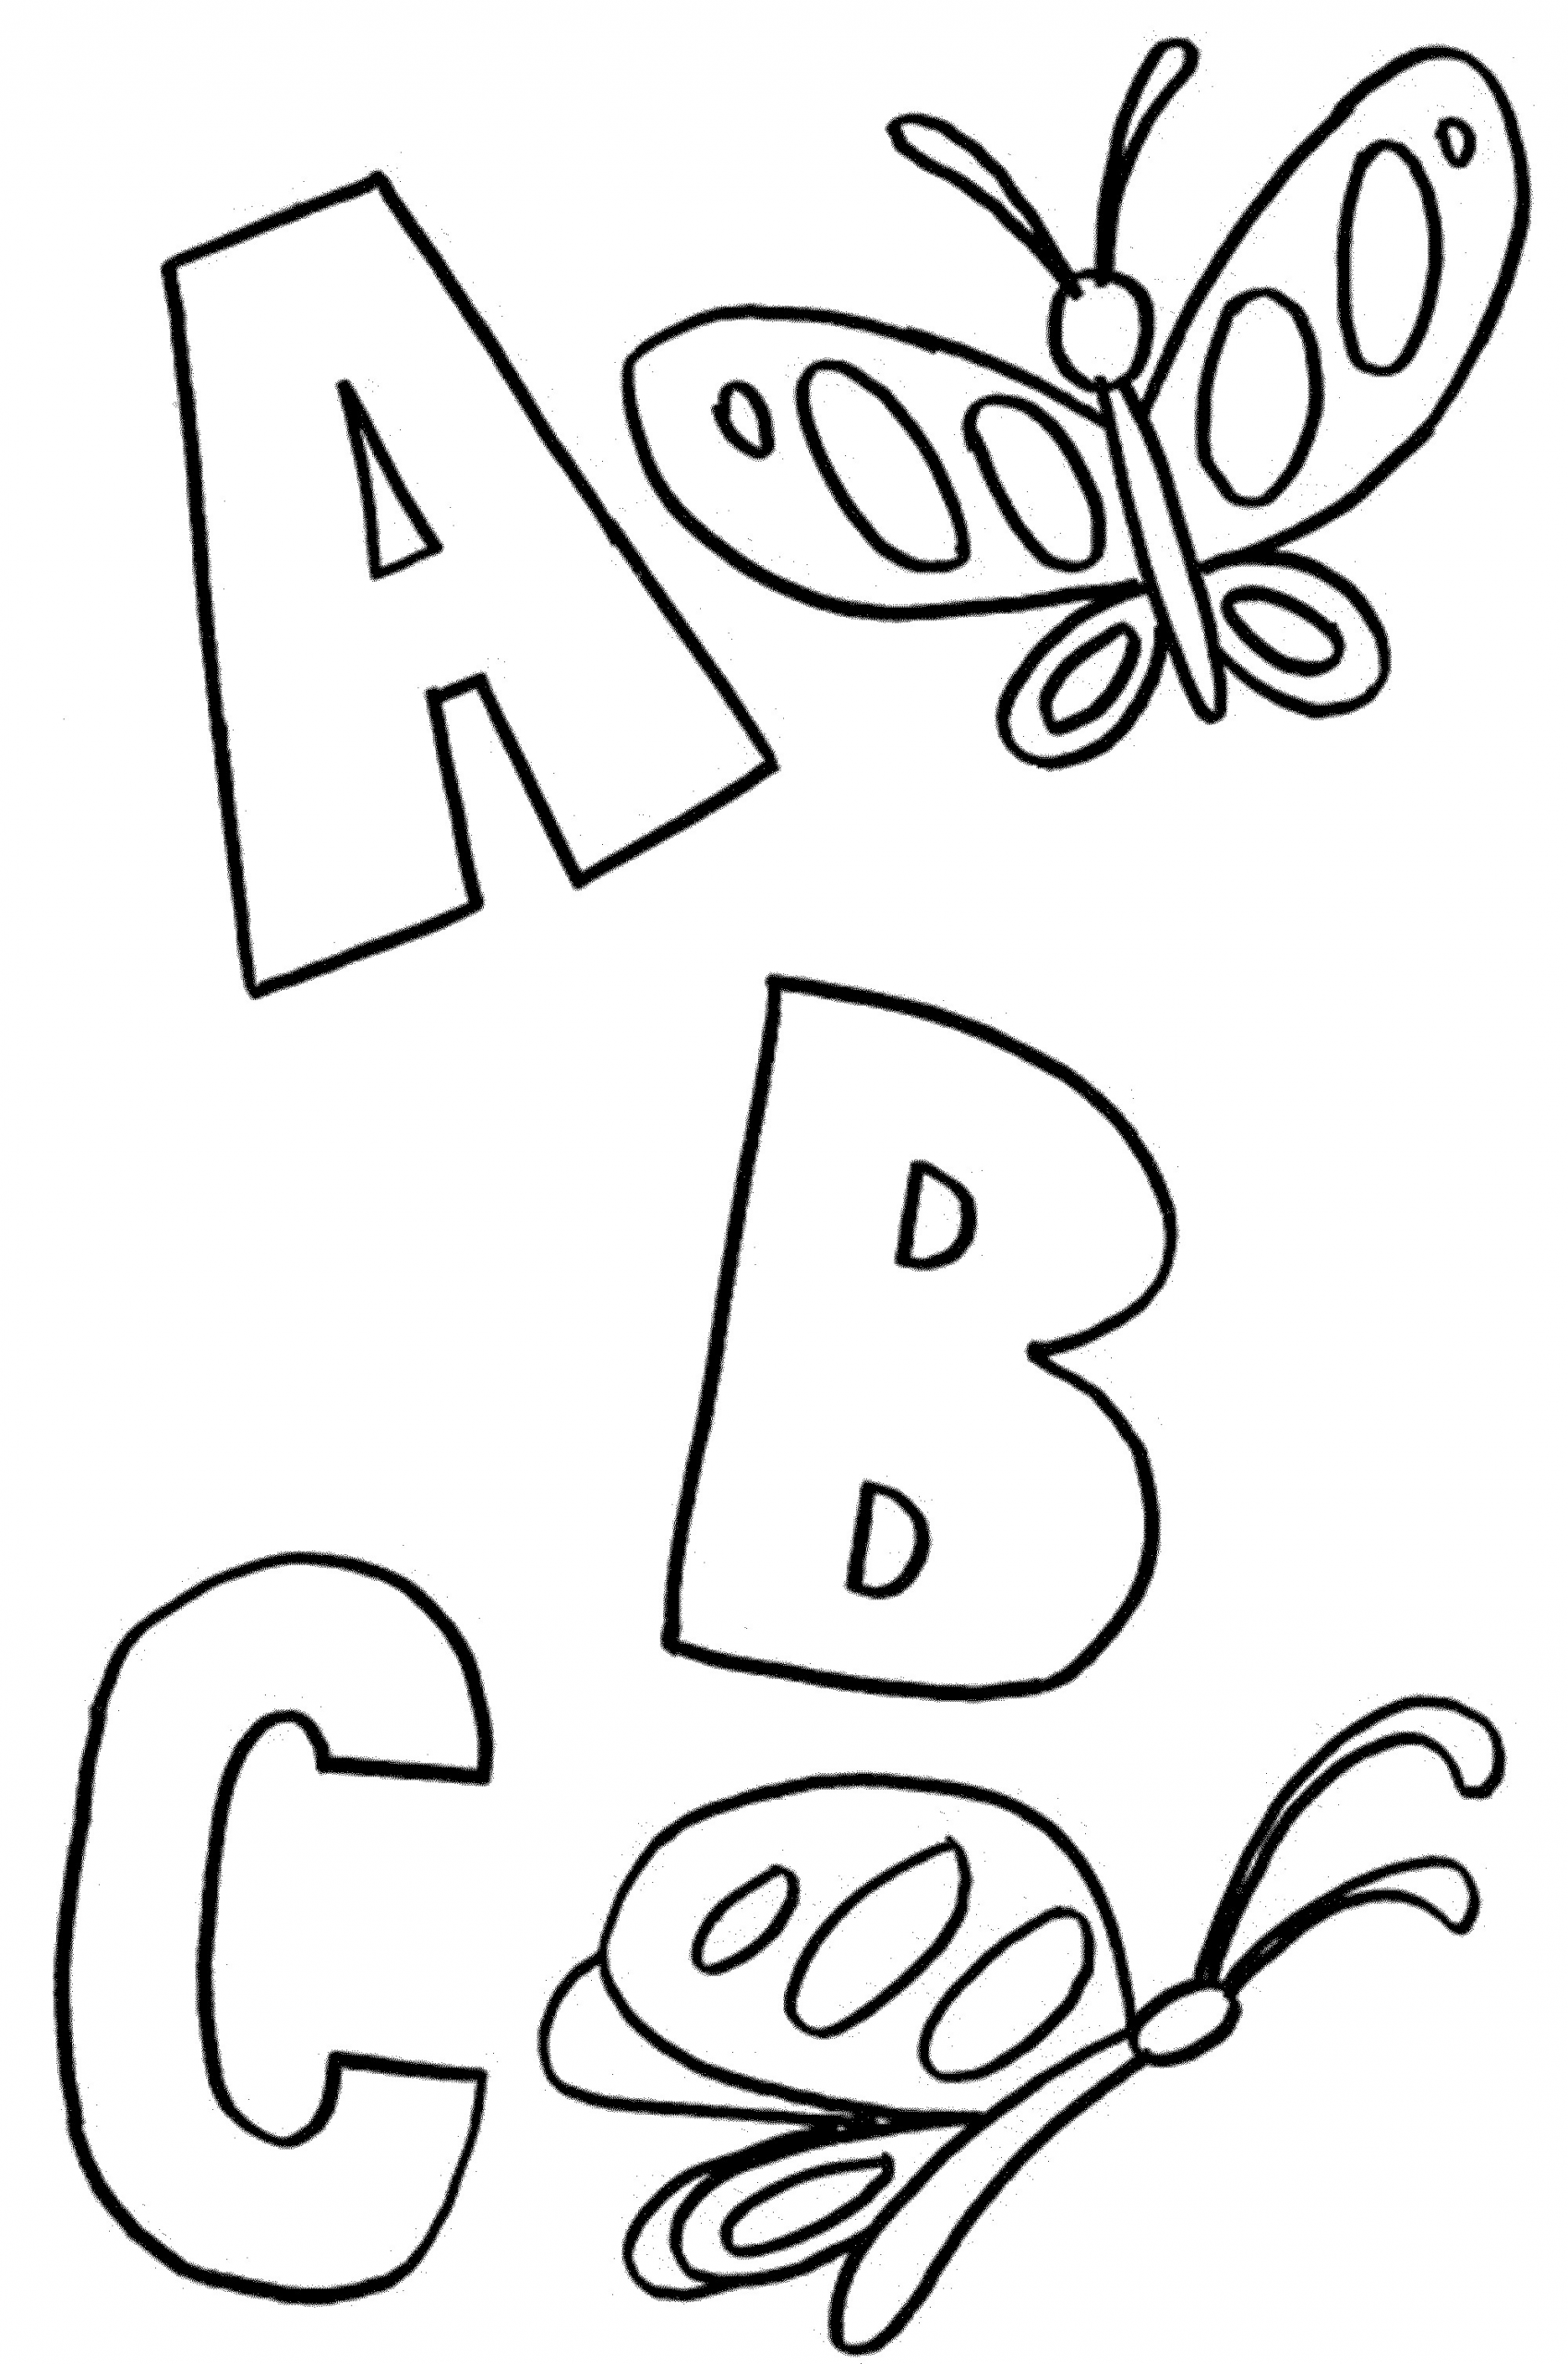 Abc Coloring Pages For Toddlers
 ABC animals coloring pages kindergarten